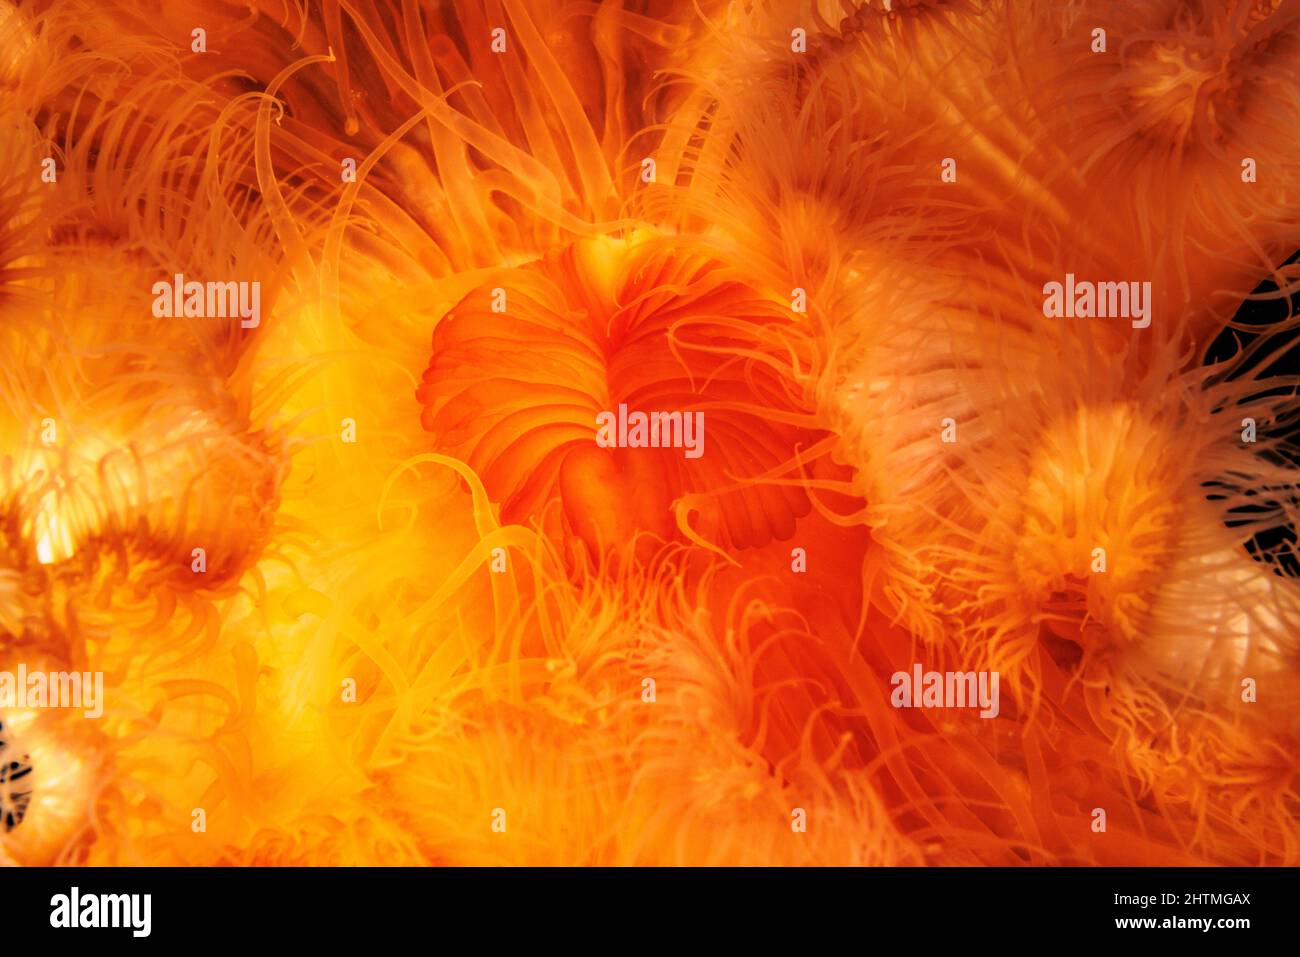 A close look at the mouth and surrounding tentacles of an orange plumose anemone, Metridium senile, in the Pacific Northwest Ocean, British Columbia, Stock Photo